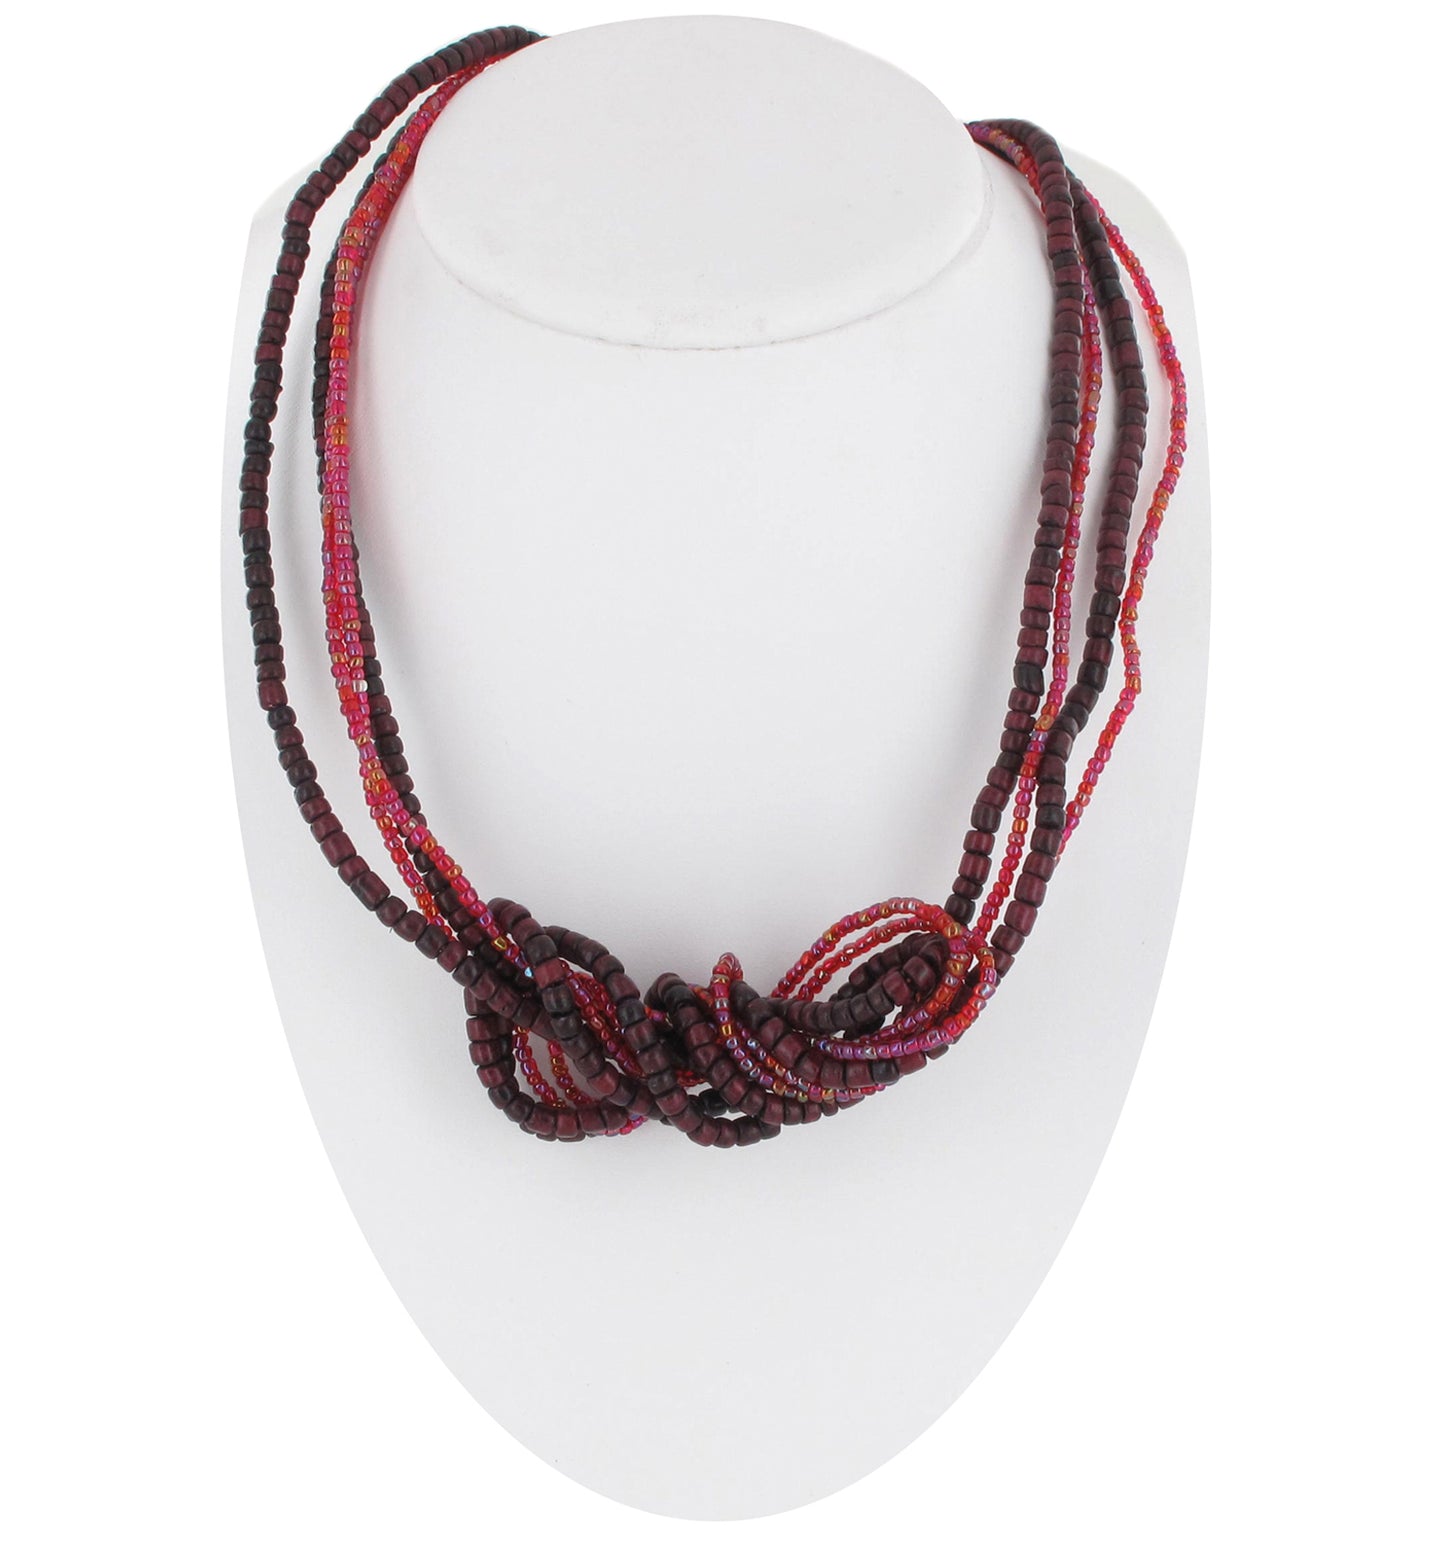 Crazy Wire Red Multicolor Beaded Wood Statement Multi Strand Necklace 40"